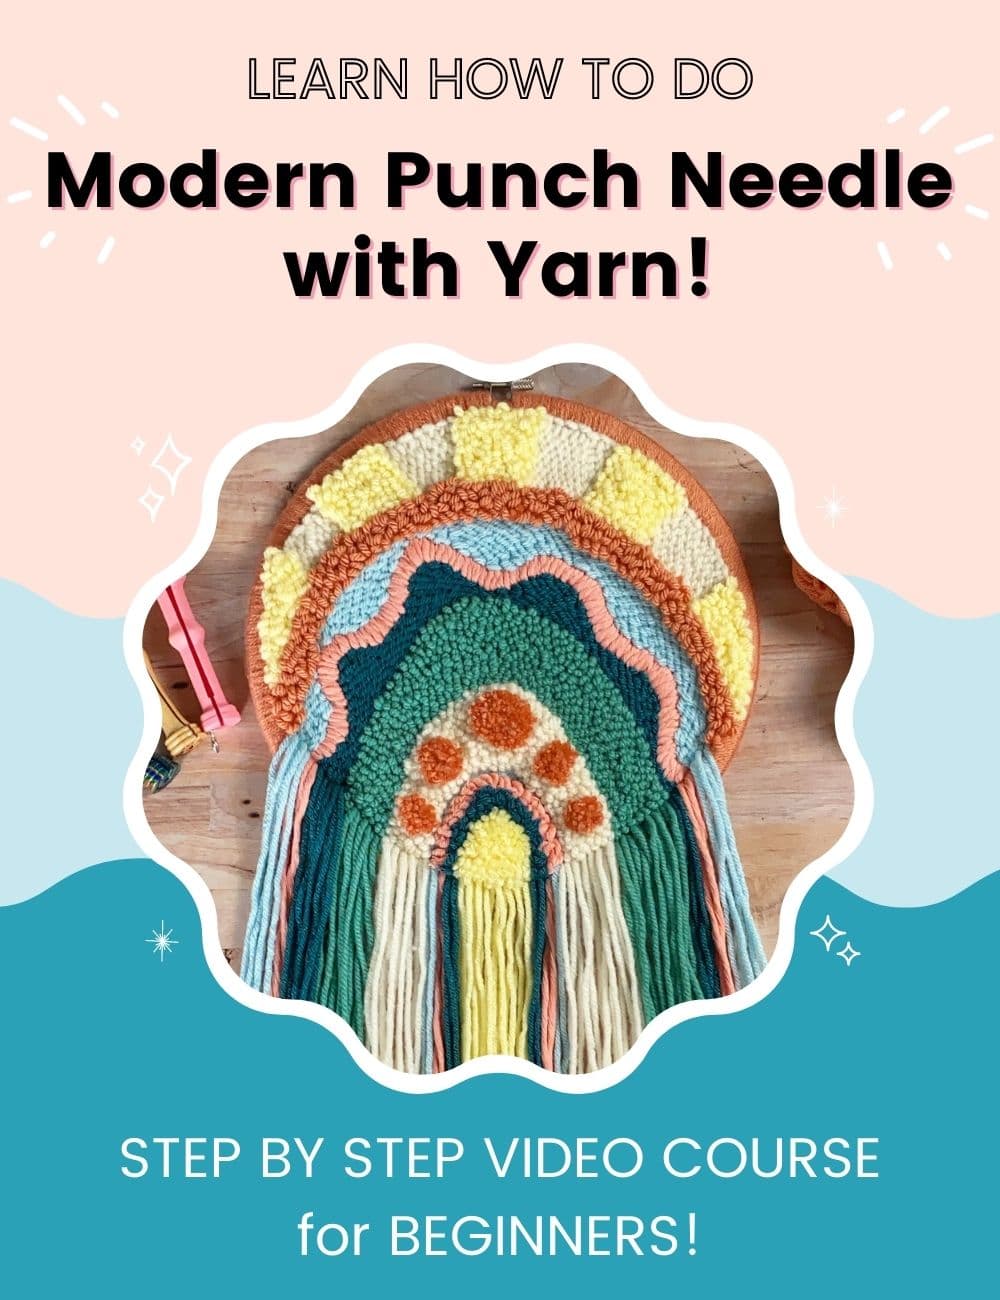 modern punch needle with yarn course image